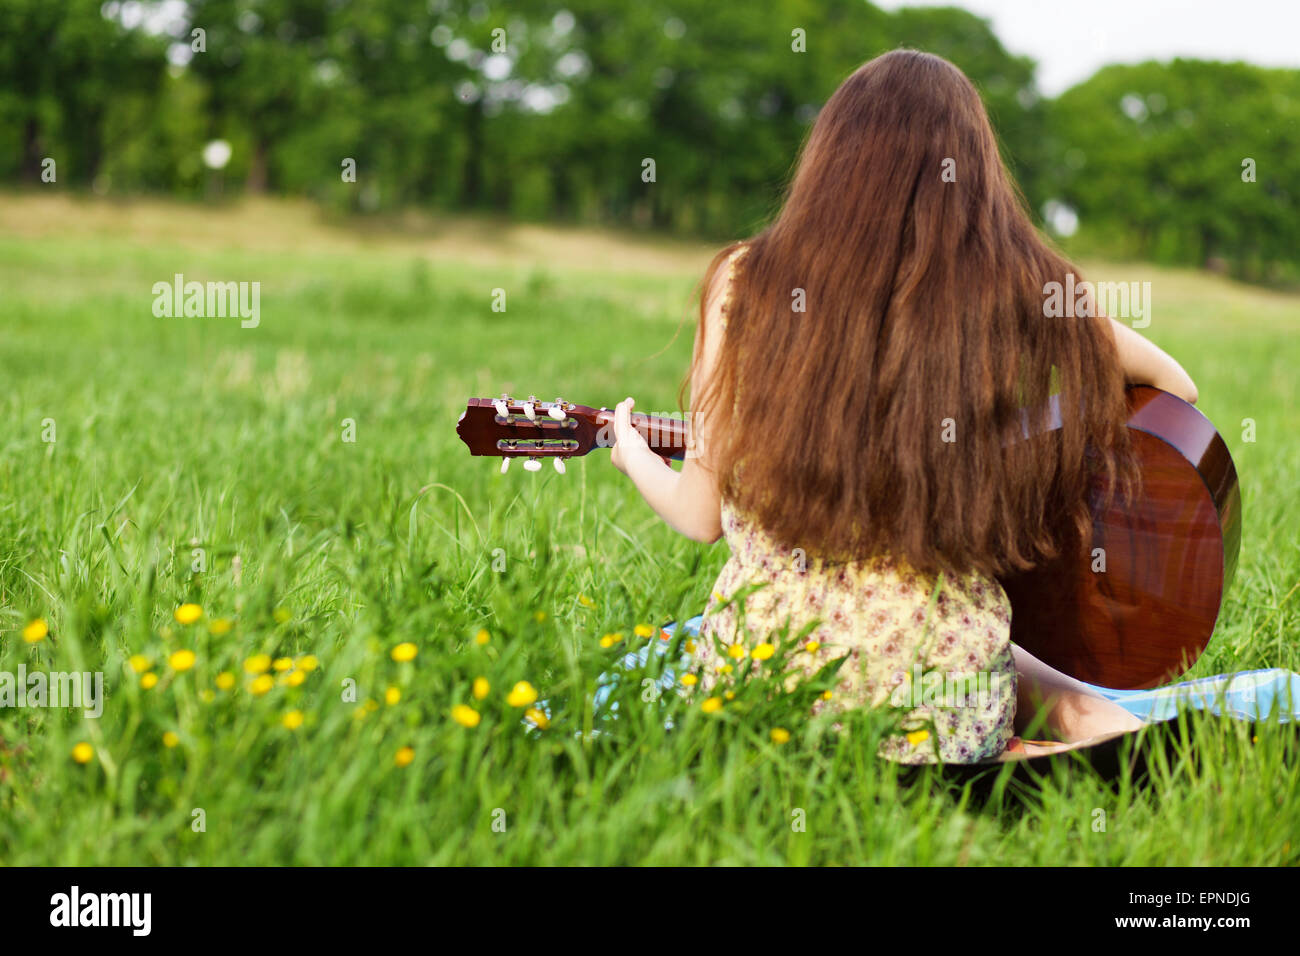 Young woman playing a guitar Stock Photo